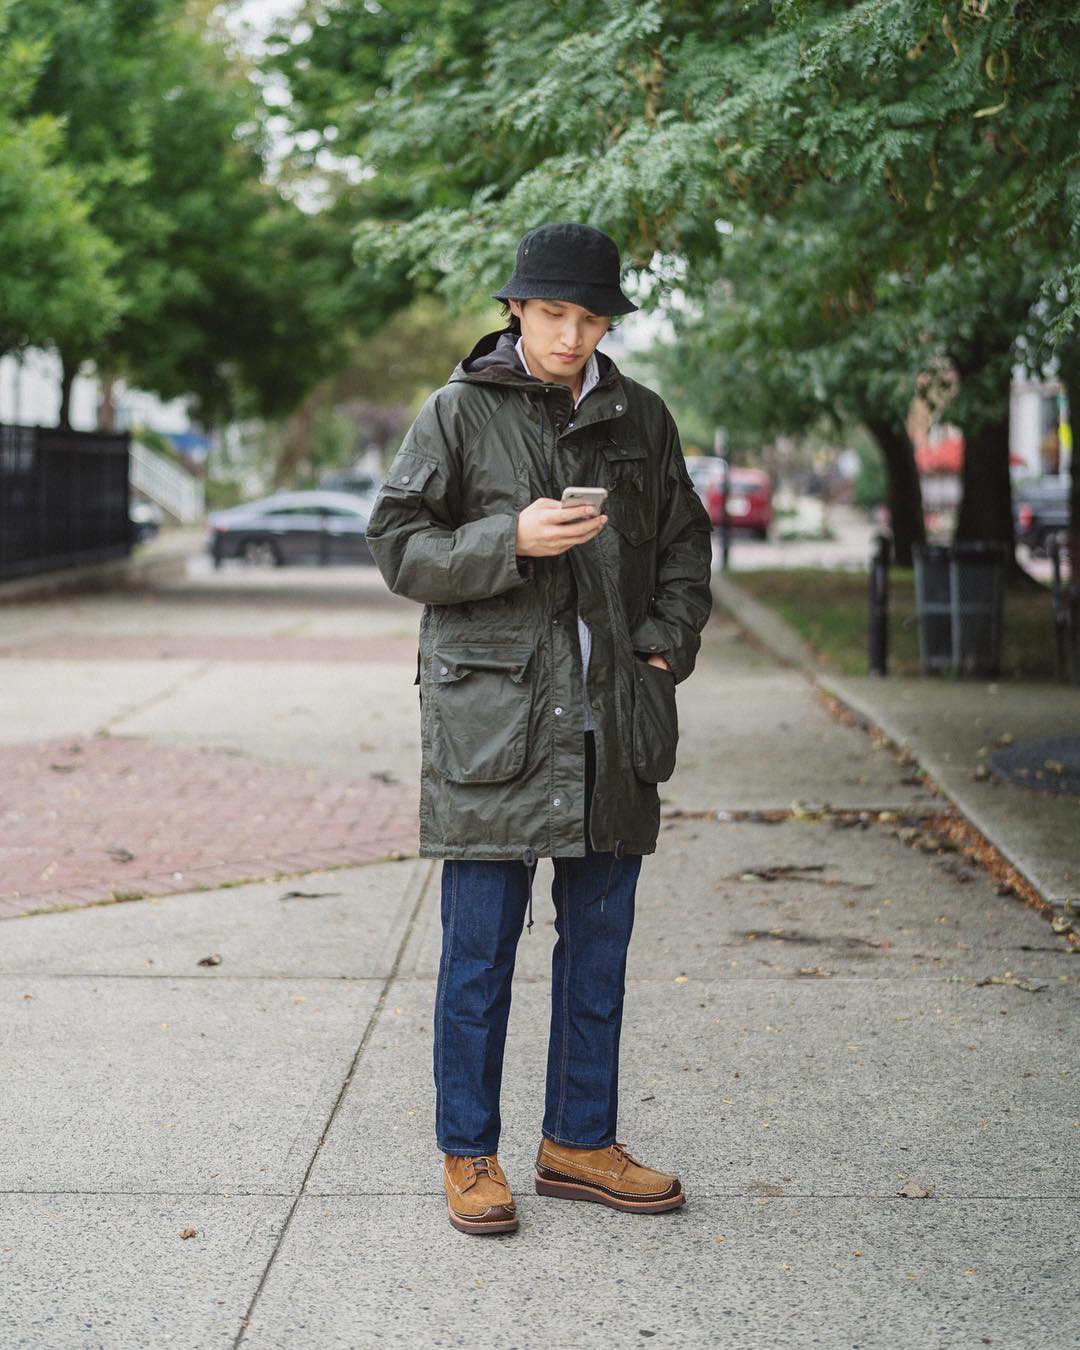 Barbour x Engineered Garments - On Sale (and Affordable) at END.